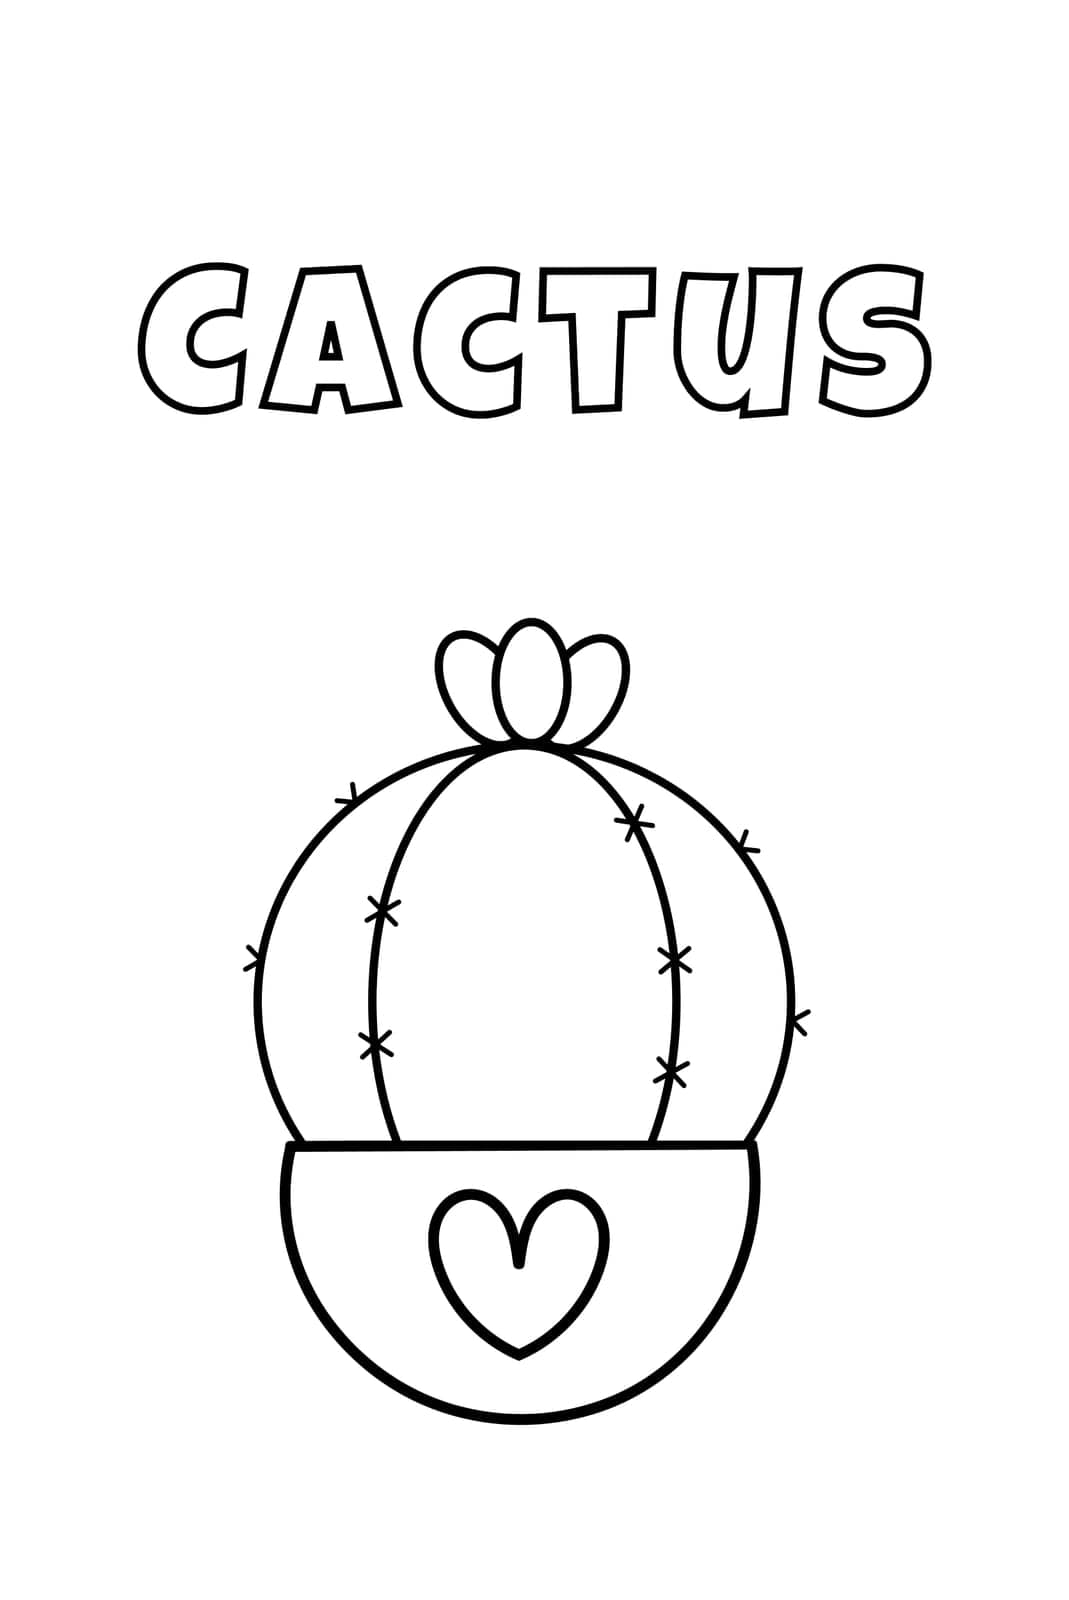 Coloring With Thick Lines For The Little Ones. Cactus Coloring book With Thick Lines For Toddlers by tan4ikk1